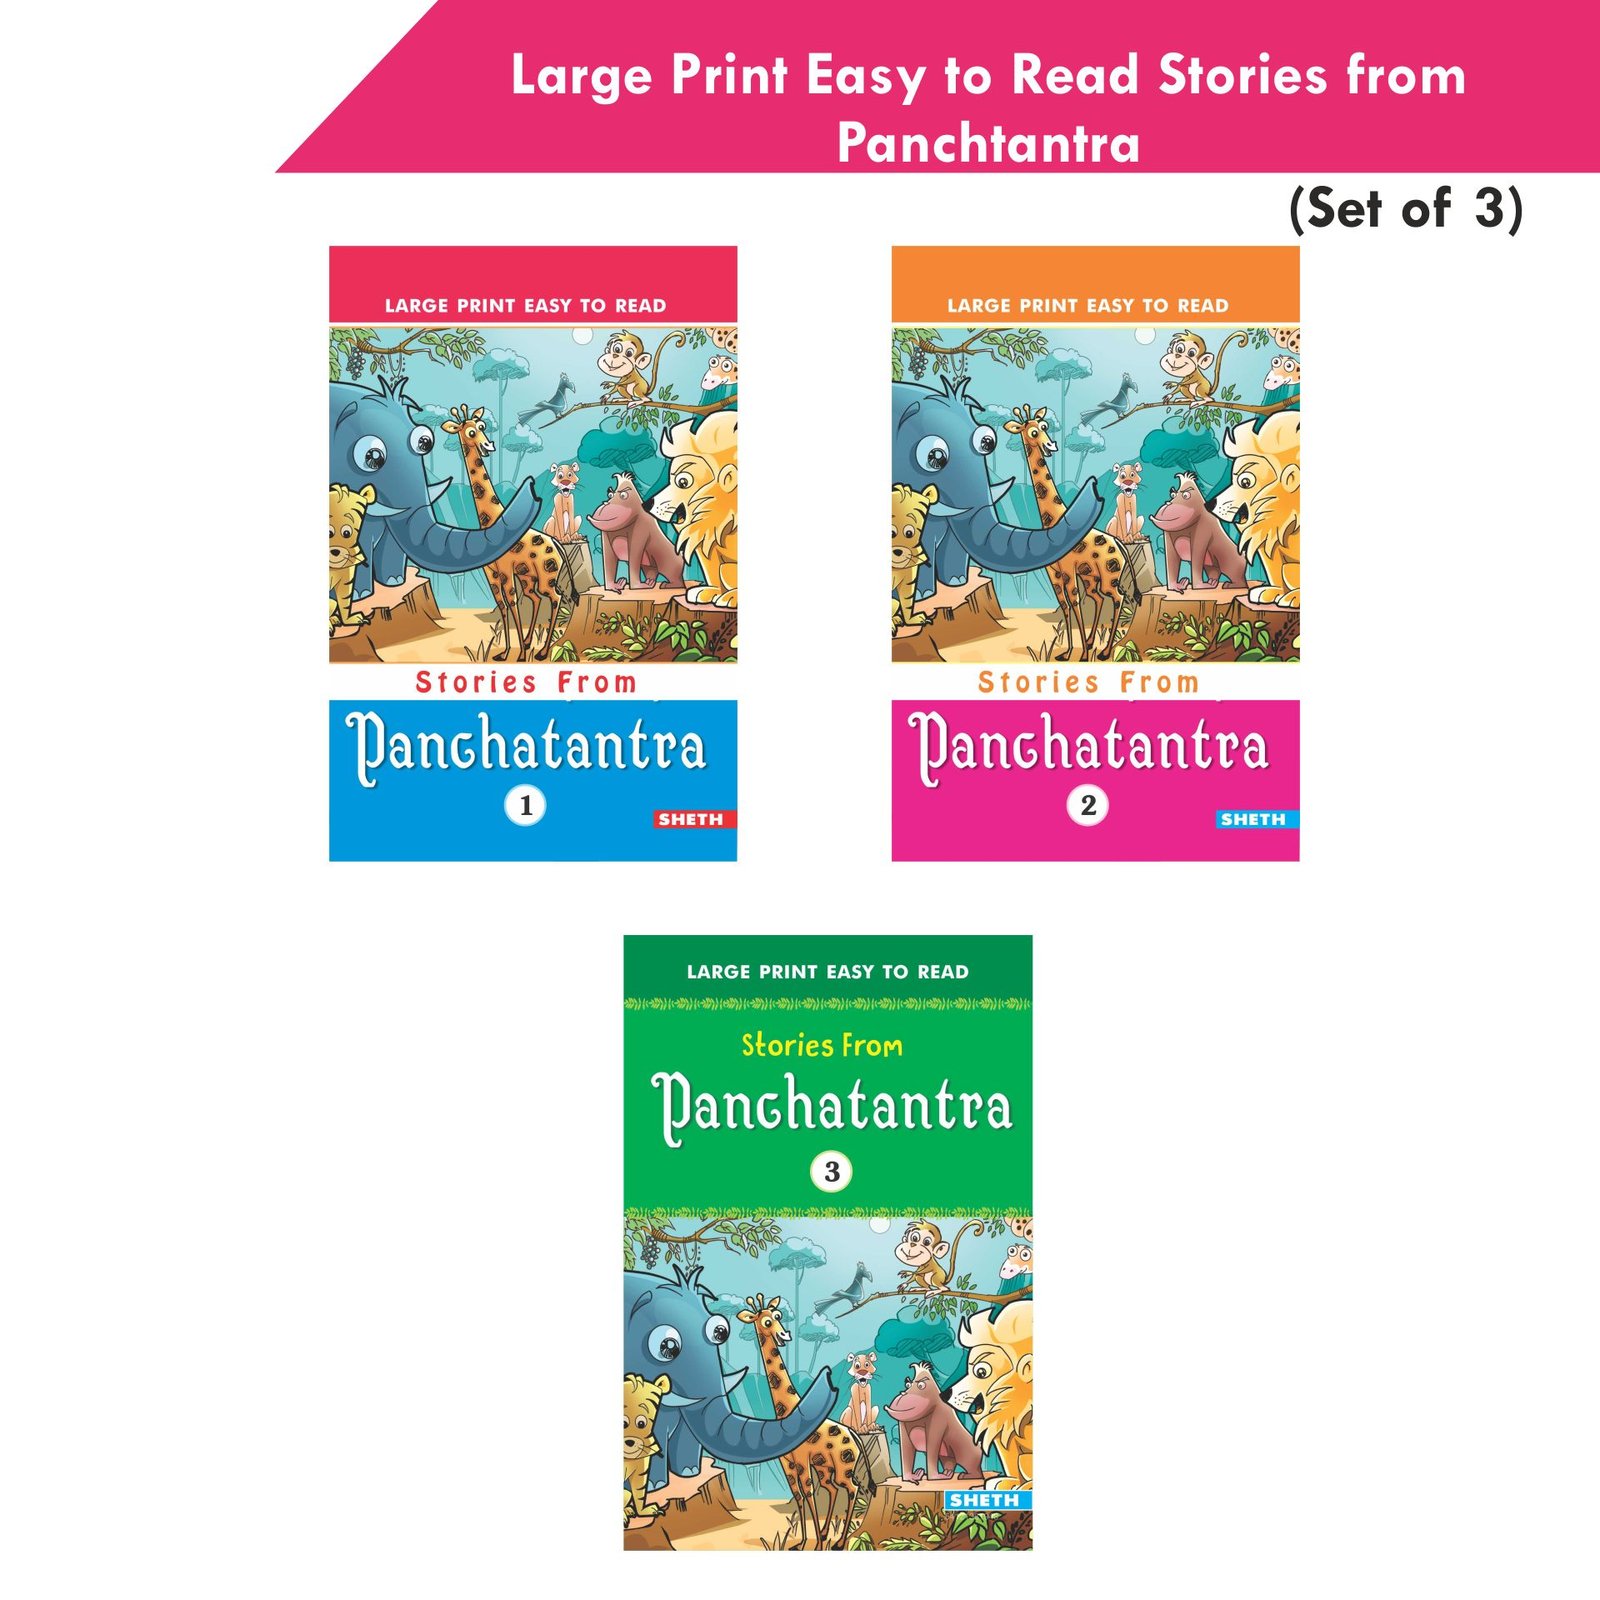 Large Print Easy to Read Stories from Panchtantra Set of 3 1